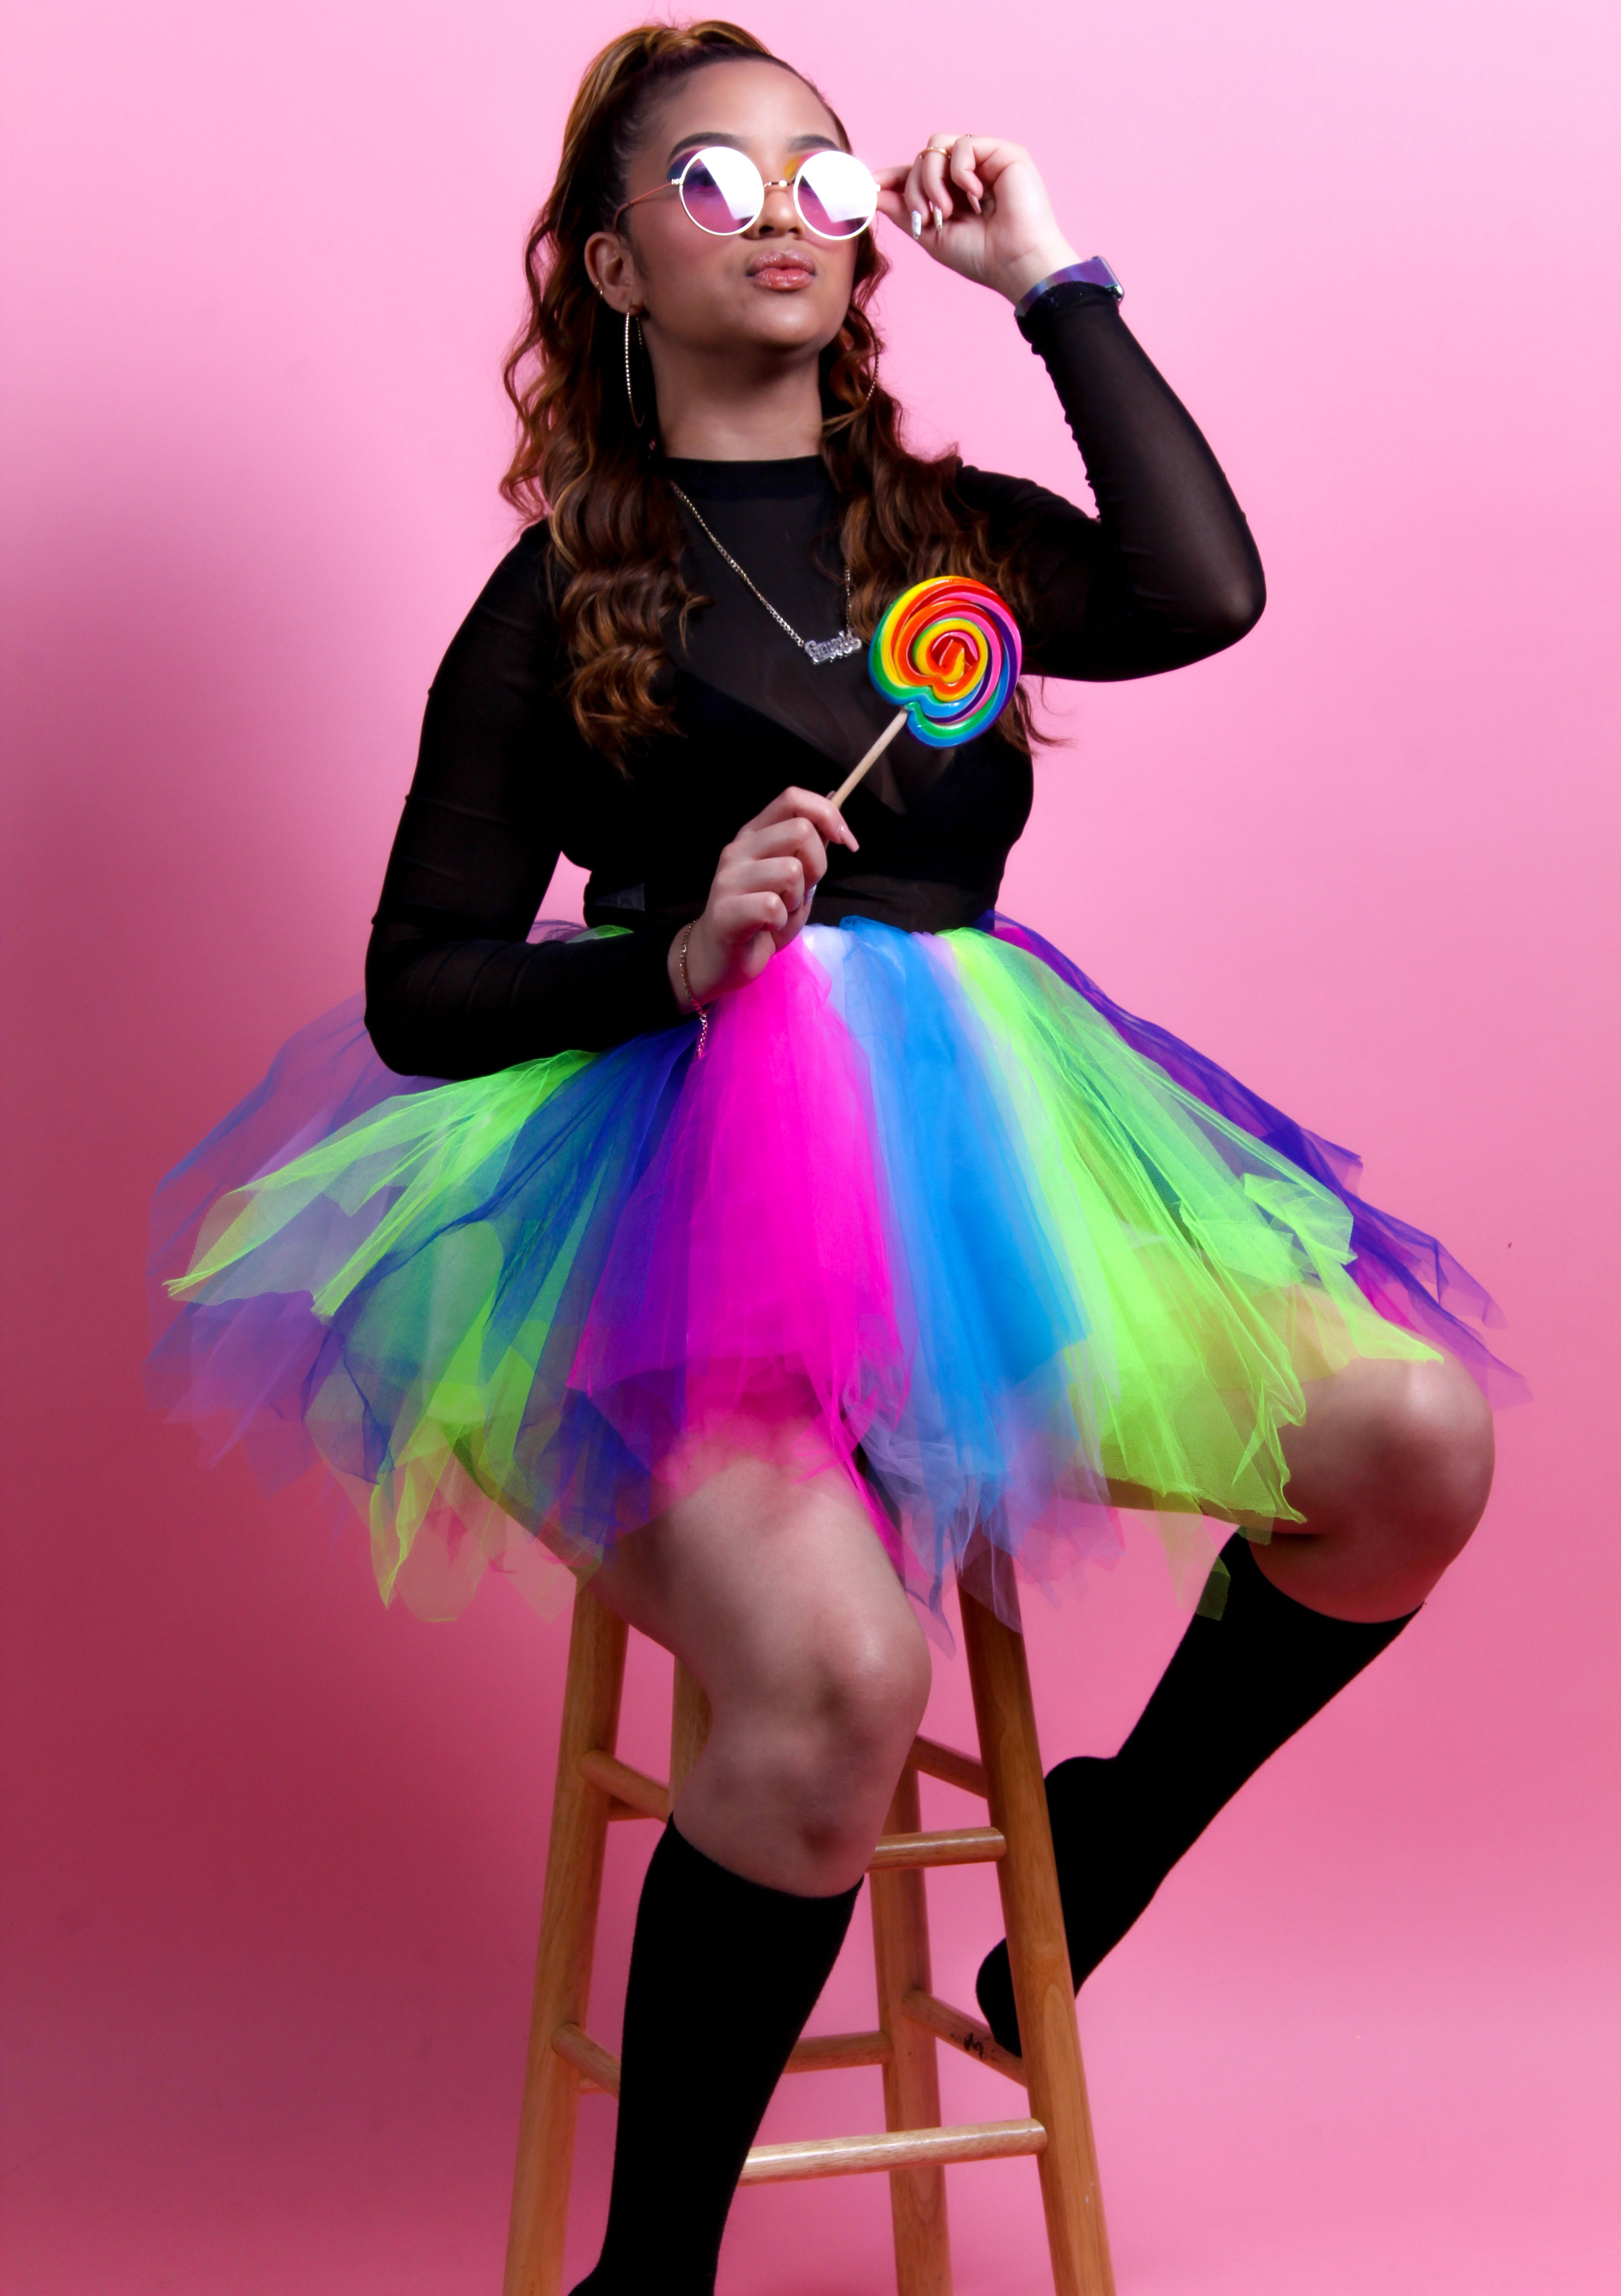 A fashion photoshoot featuring a woman holding a rainbow lollipop.